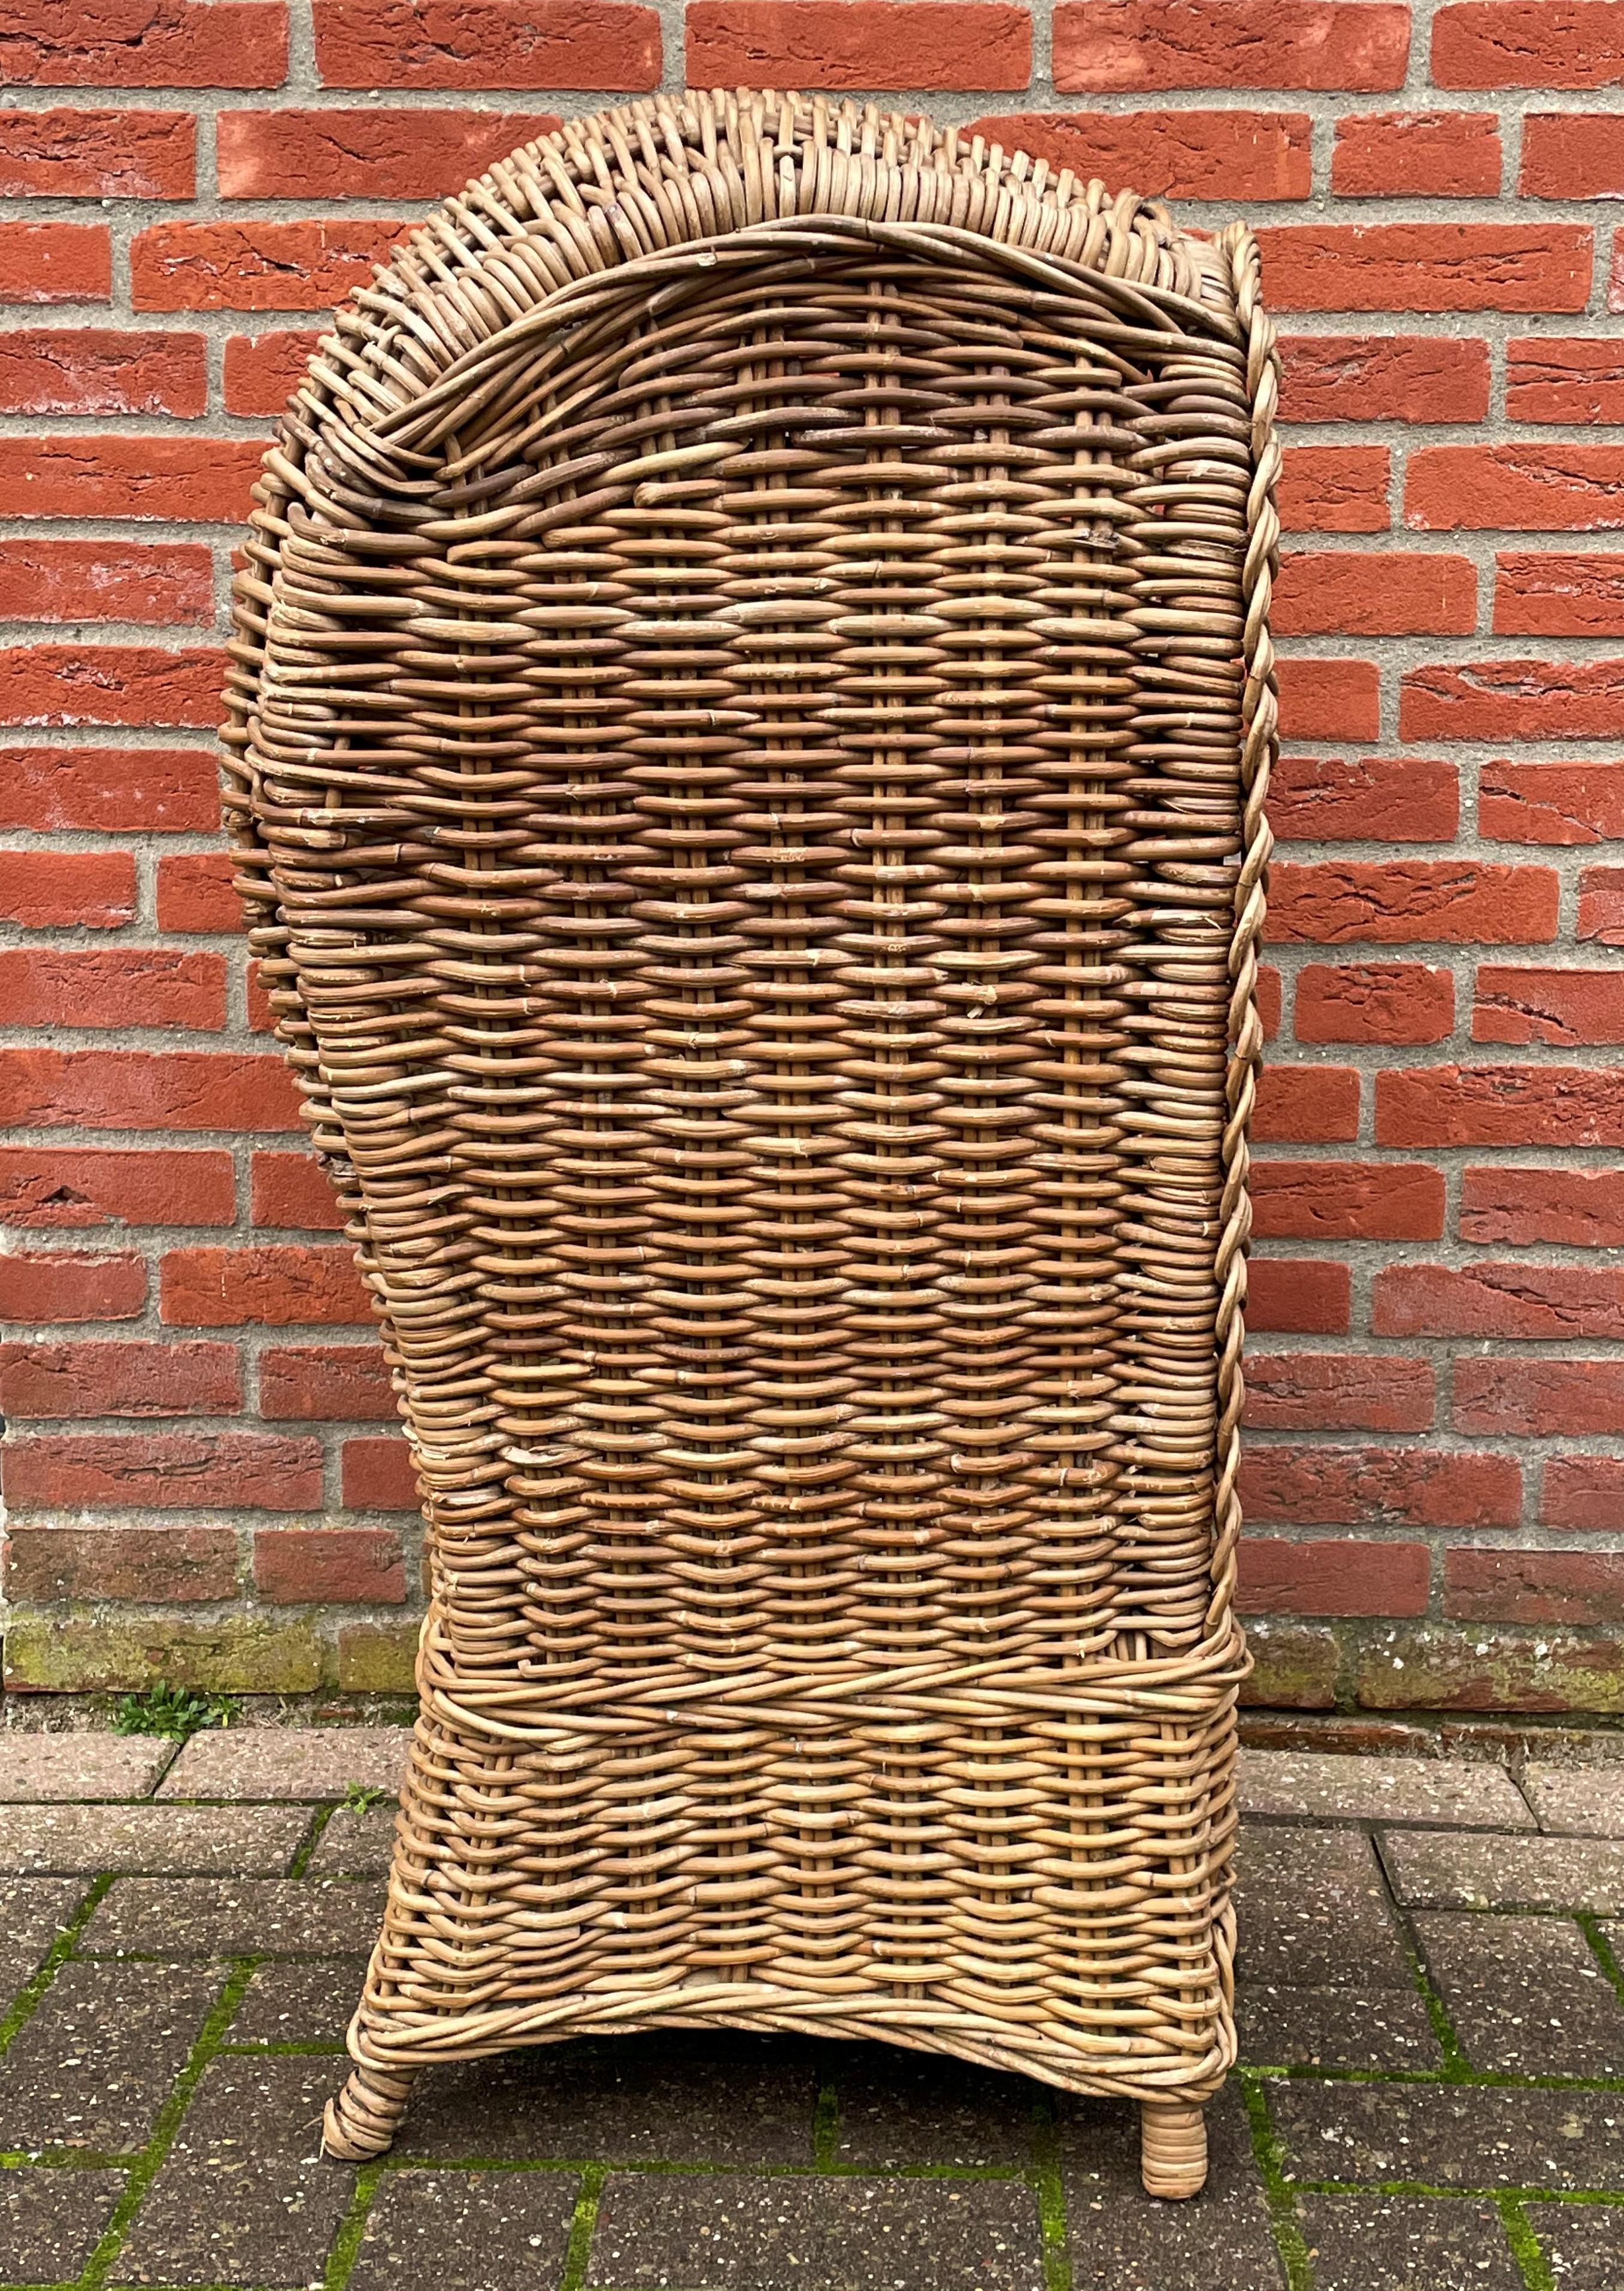 Very Rare & Super Decorative Antique-Like Hand Woven Rattan Beach Chair for Kids In Good Condition For Sale In Lisse, NL